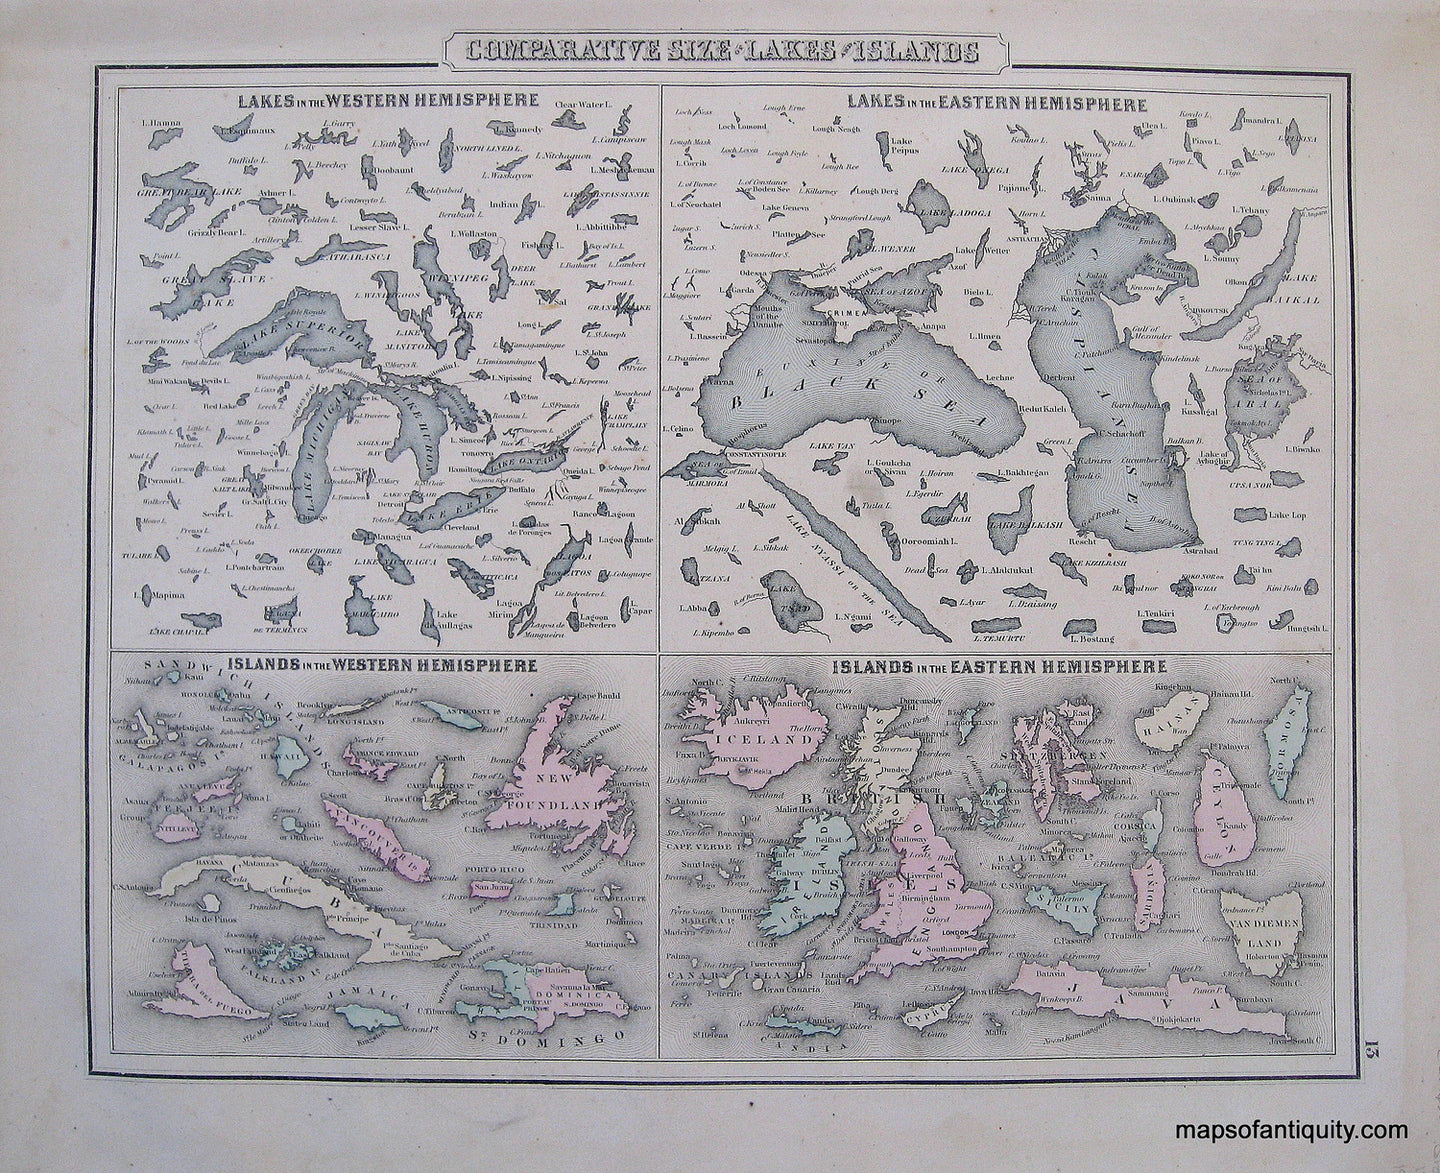 Antique-Hand-Colored-Map-Comparative-Size-of-Lakes-and-Islands-in-Eastern-and-Western-Hemispheres-**********-Comparative-Maps--1876-Gray-Maps-Of-Antiquity